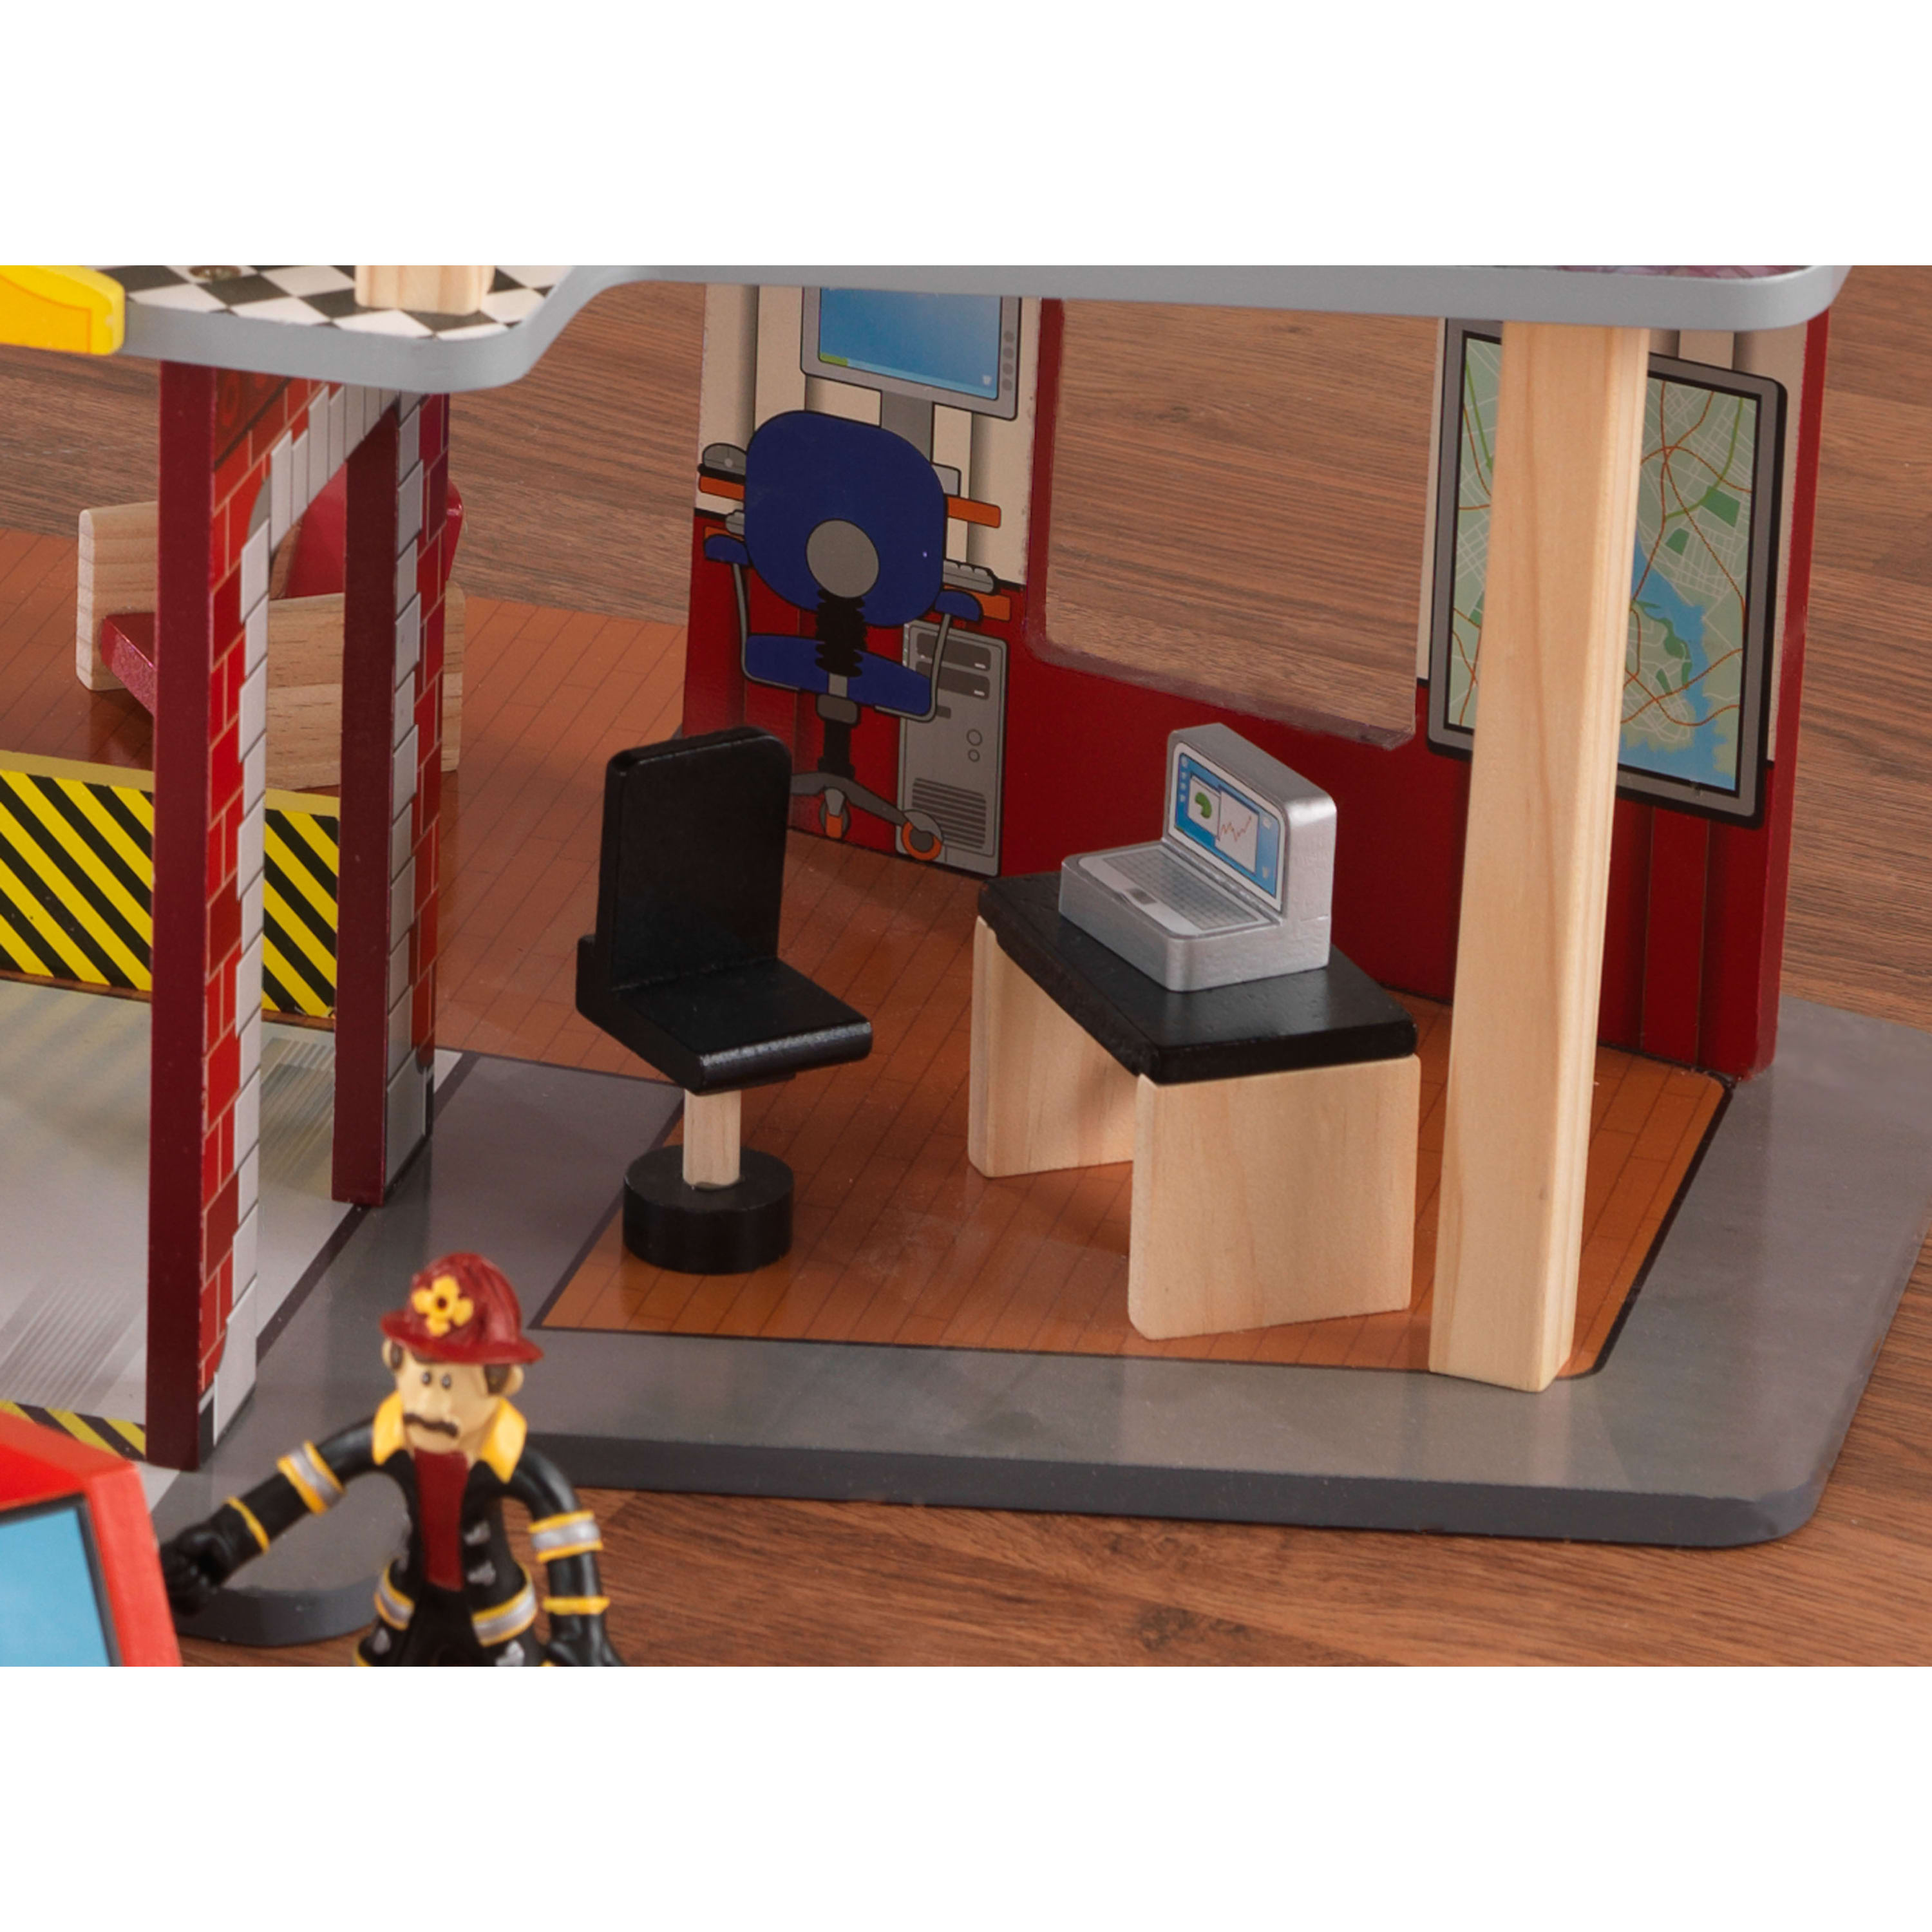 KidKraft Deluxe Wood Rescue Play Set with Ambulance, Fire Truck, Helicopter & 27 Pieces - image 5 of 7